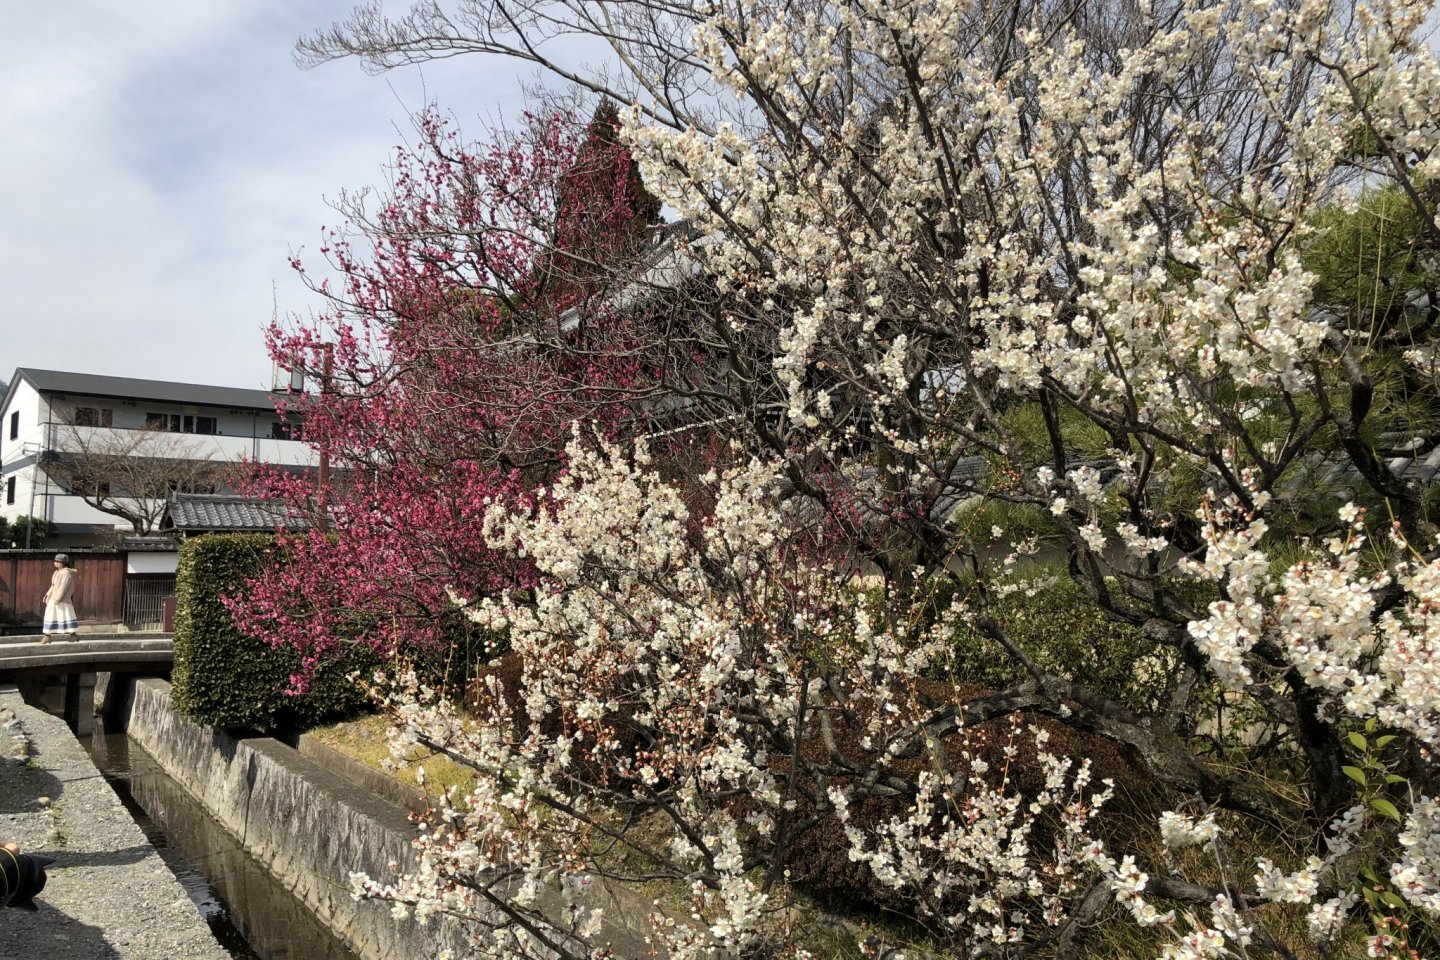 Just some of the many plum blossoms on the grounds here